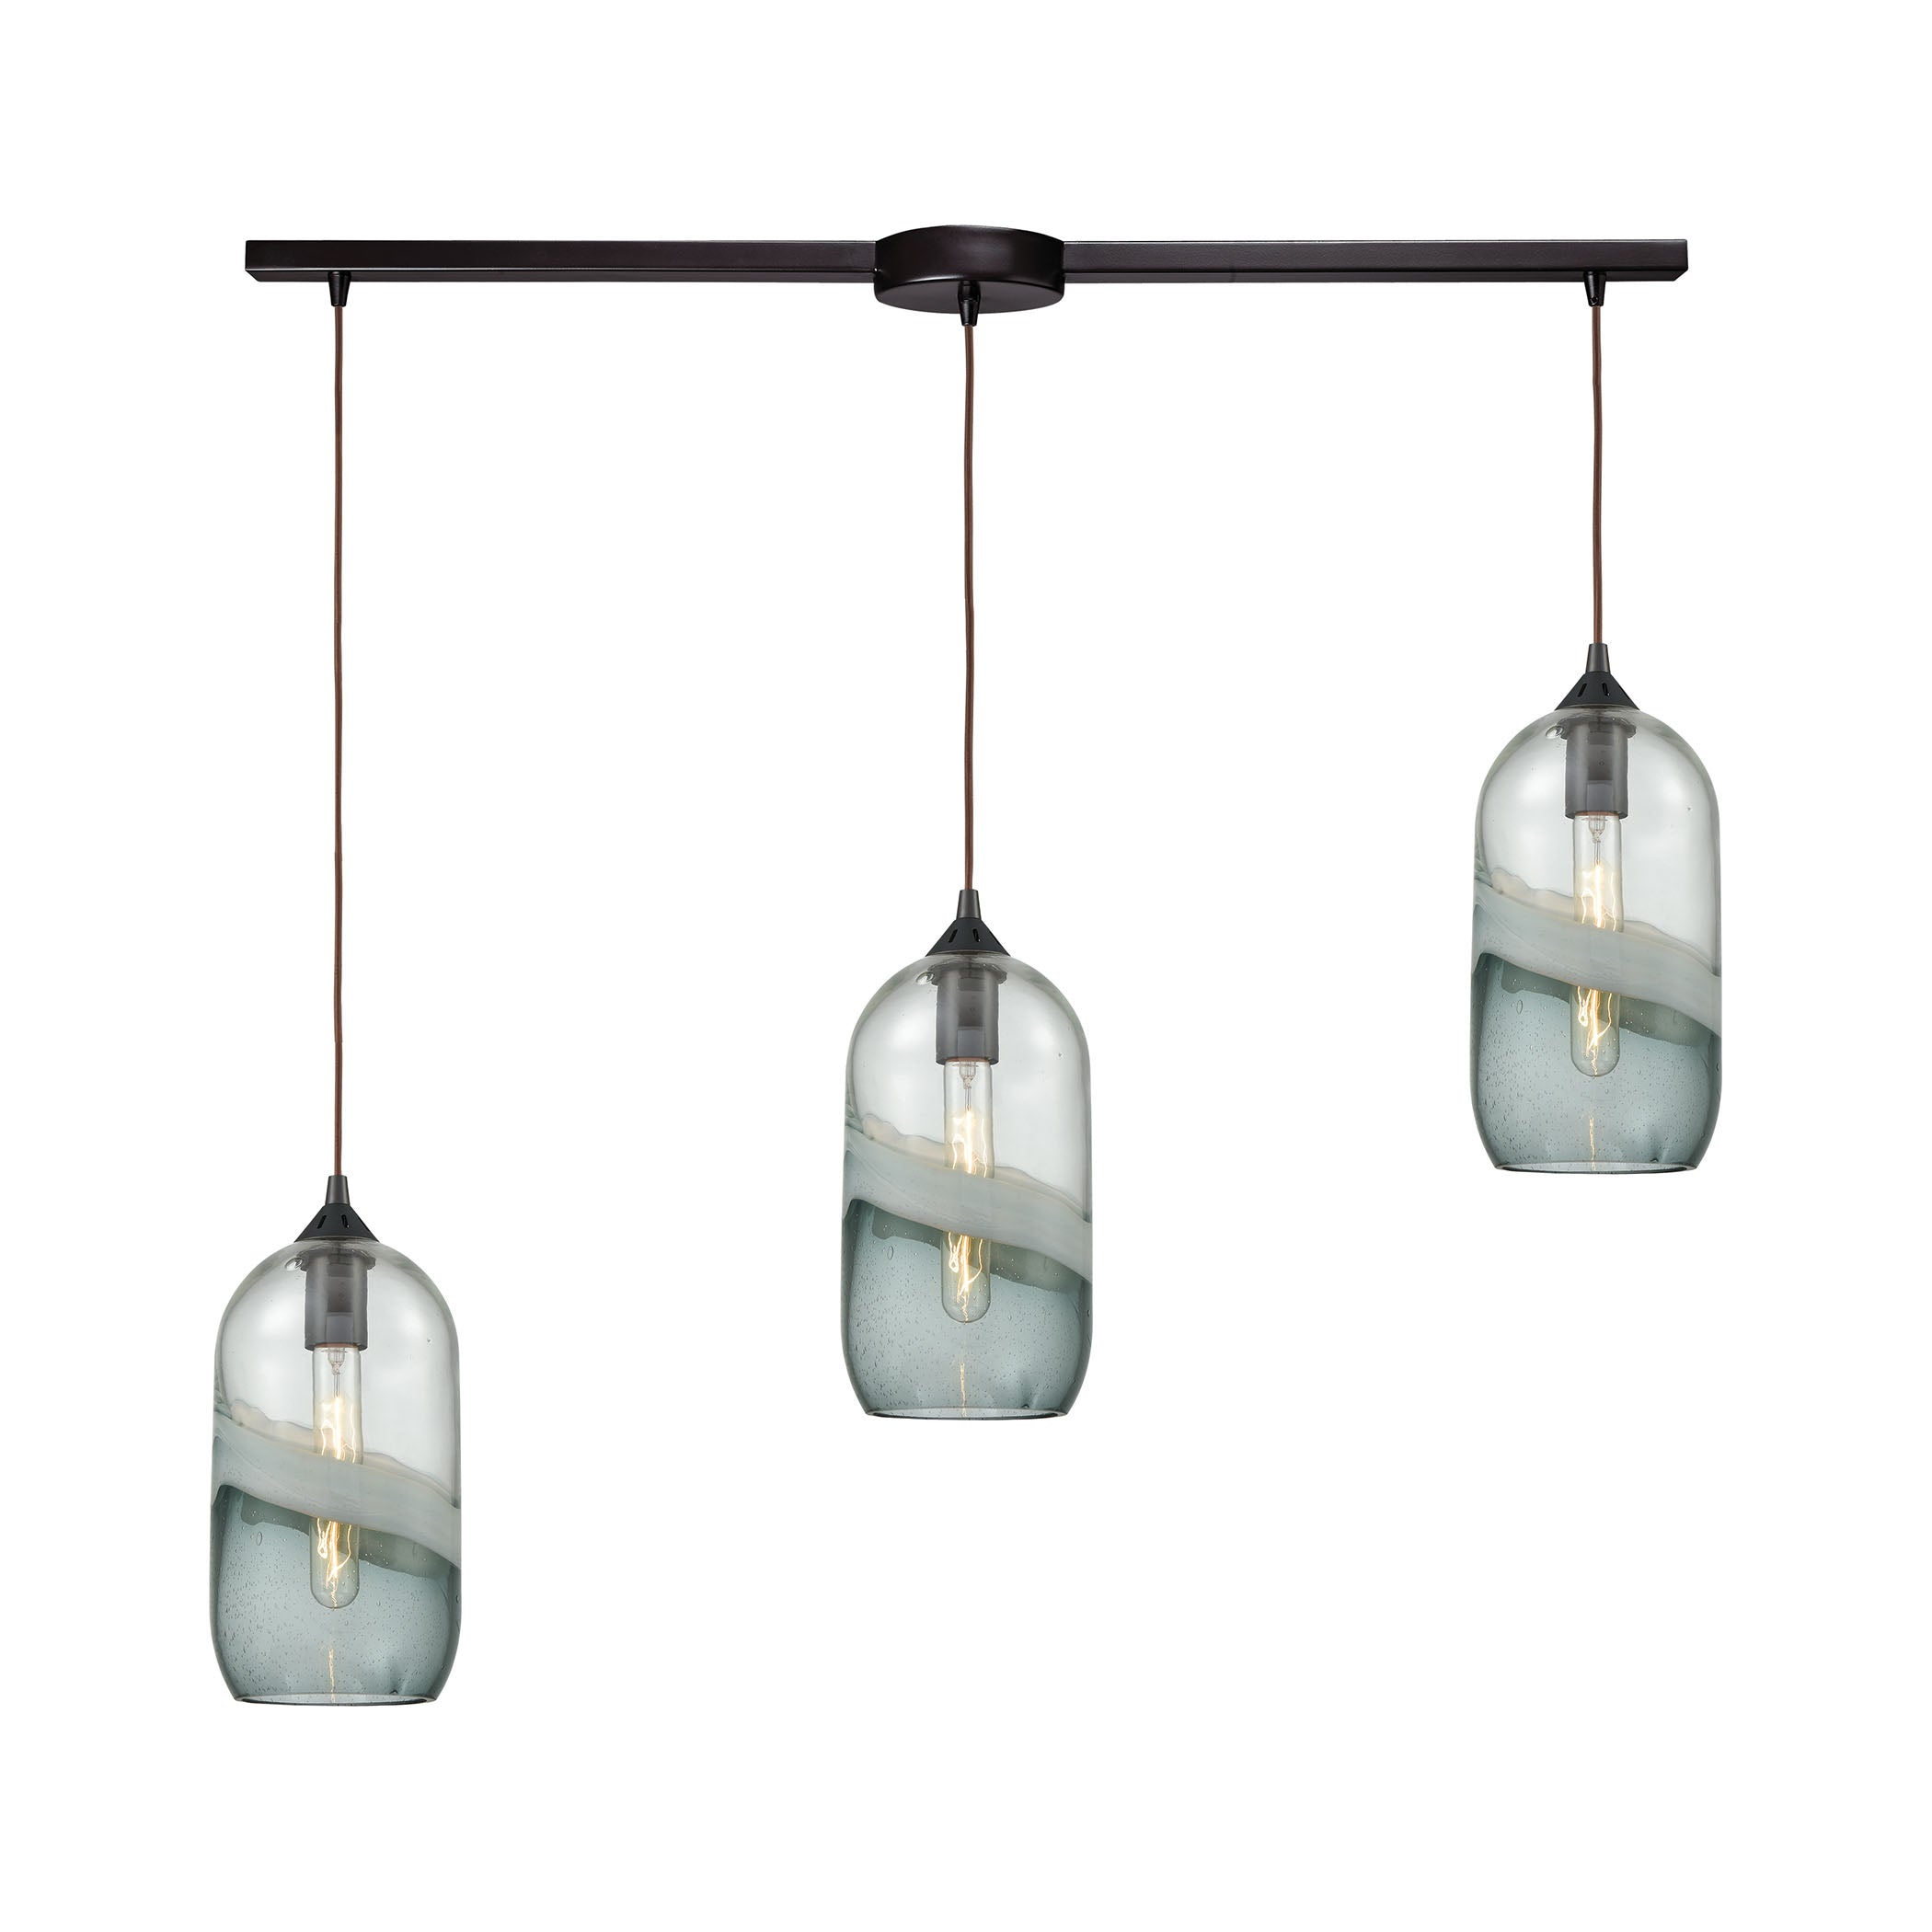 ELK Lighting 25102/3L Sutter Creek 3-Light Linear Mini Pendant Fixture in Oiled Bronze with Clear and Smoke Seedy Glass